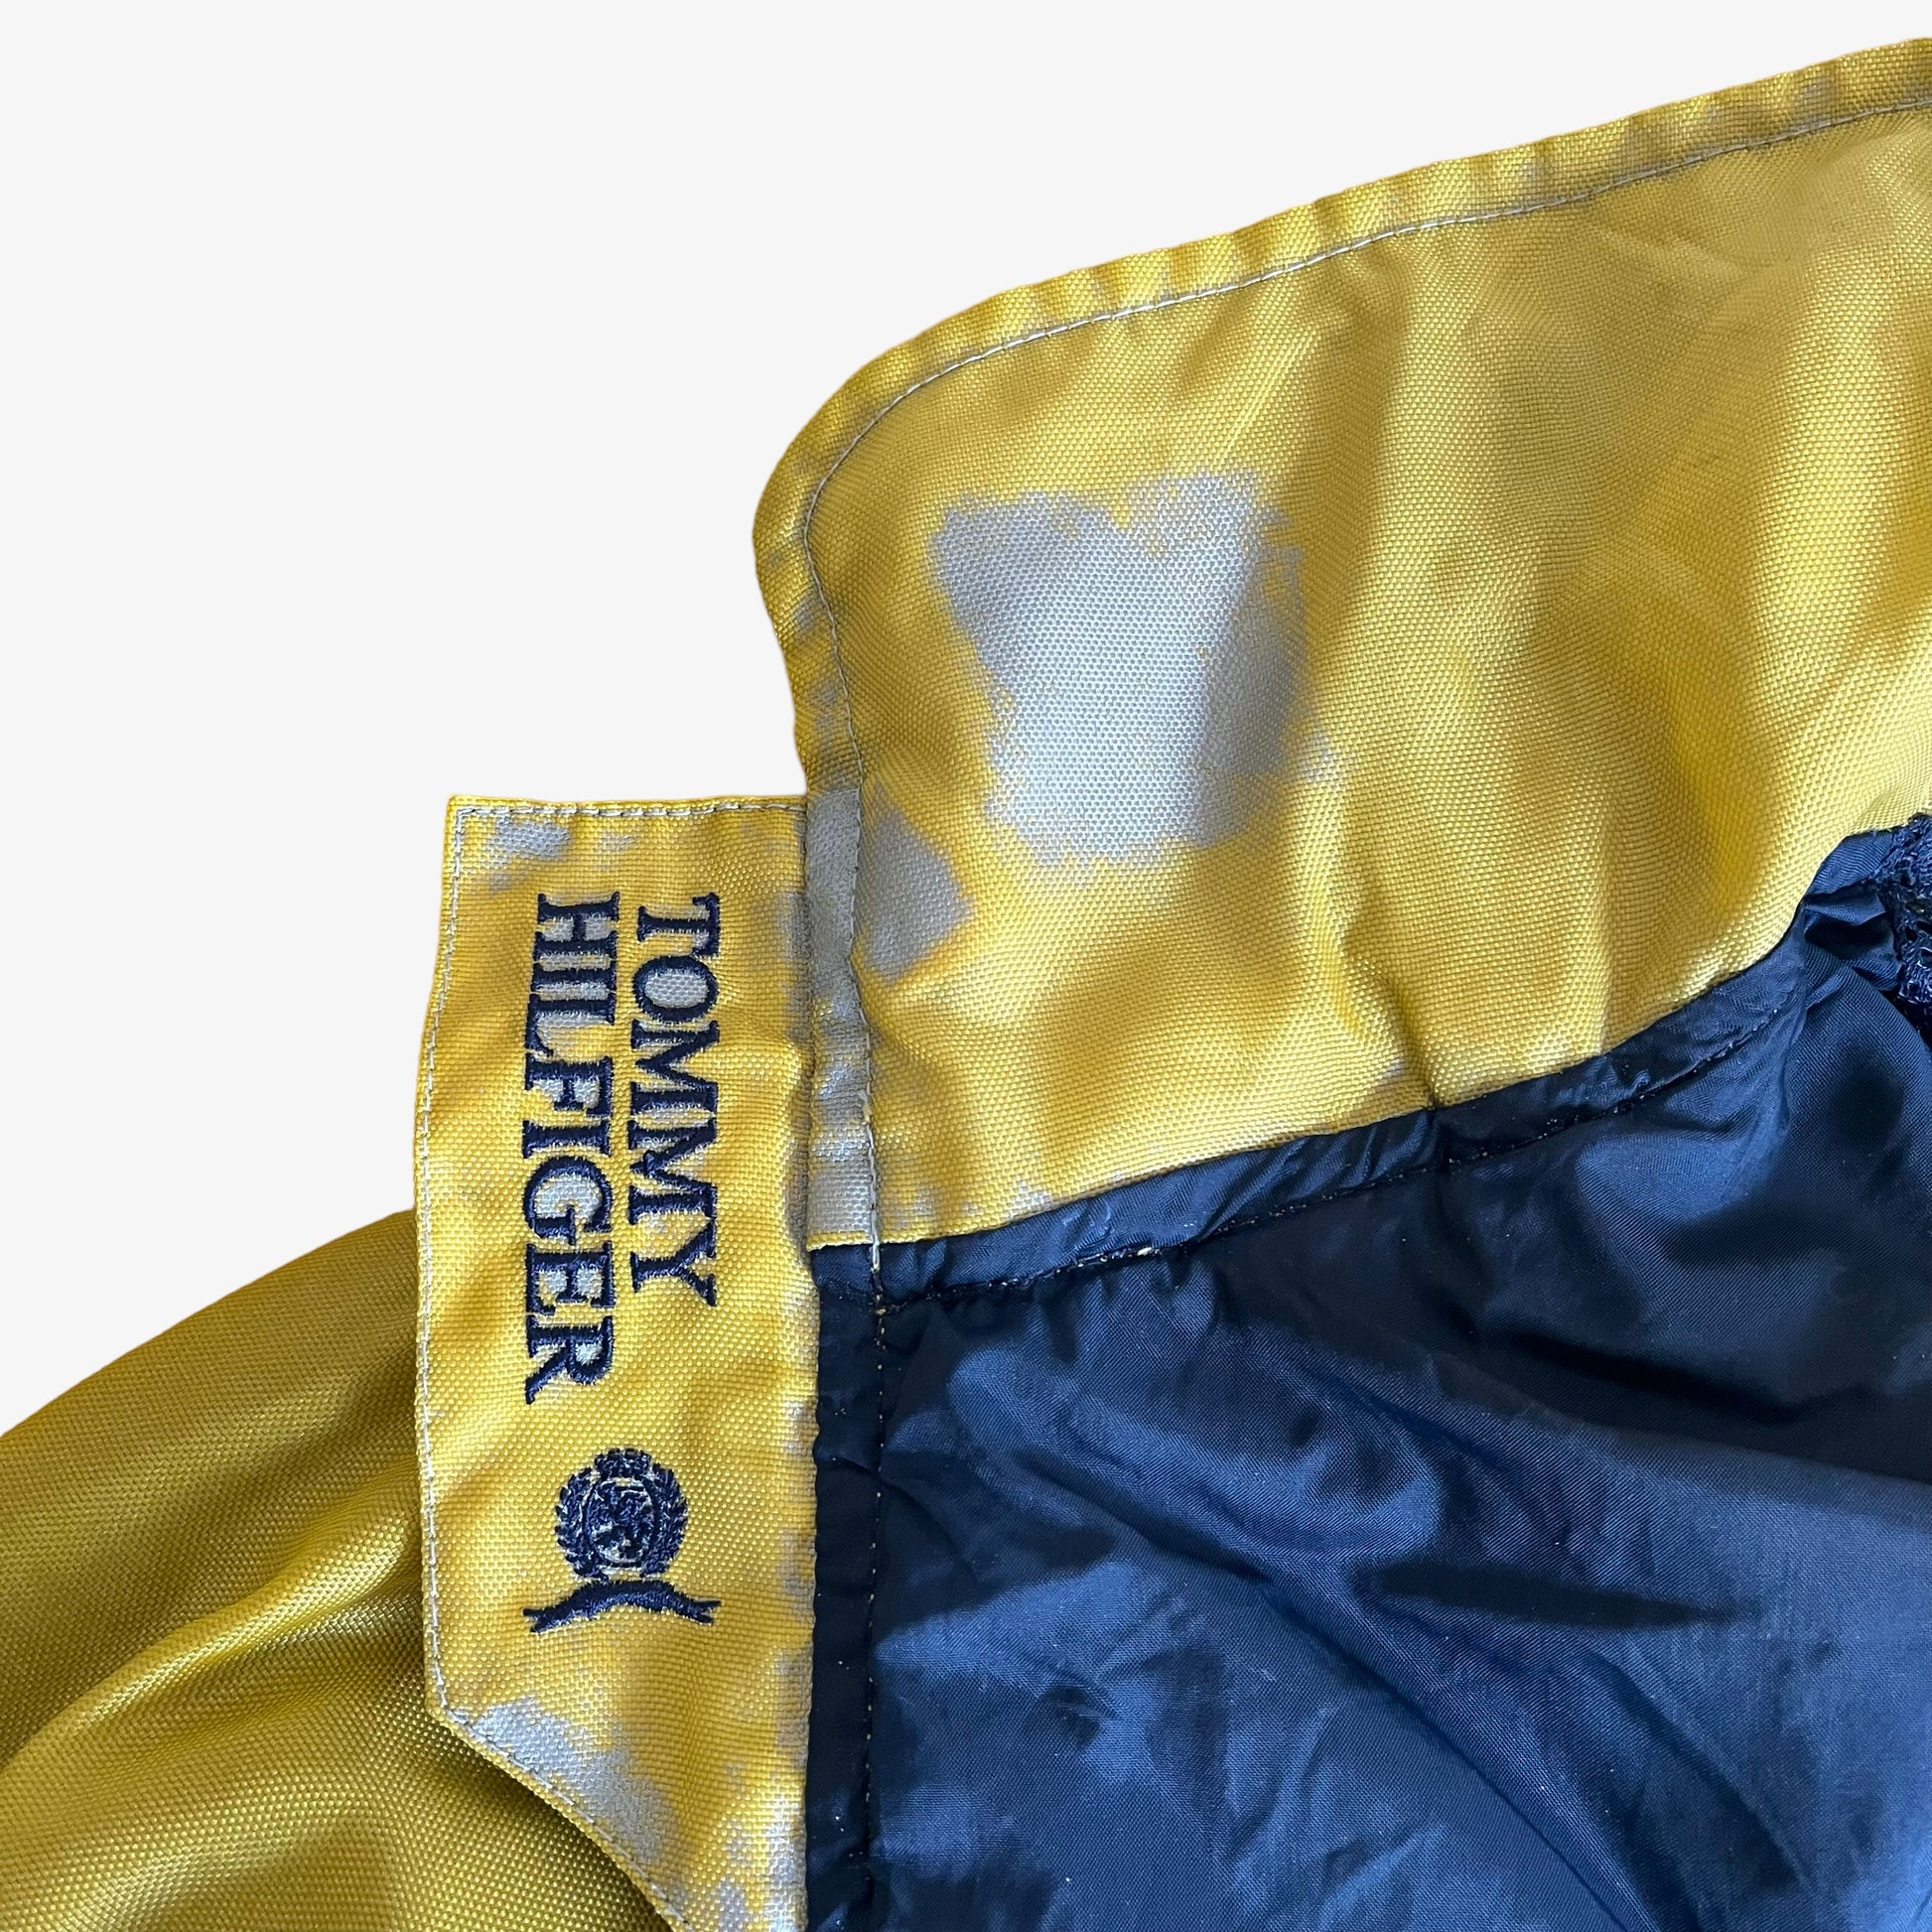 Vintage 90s Tommy Hilfiger Yellow Sailing Gear Jacket With Hook Fasteners Collar Wear - Casspios Dream